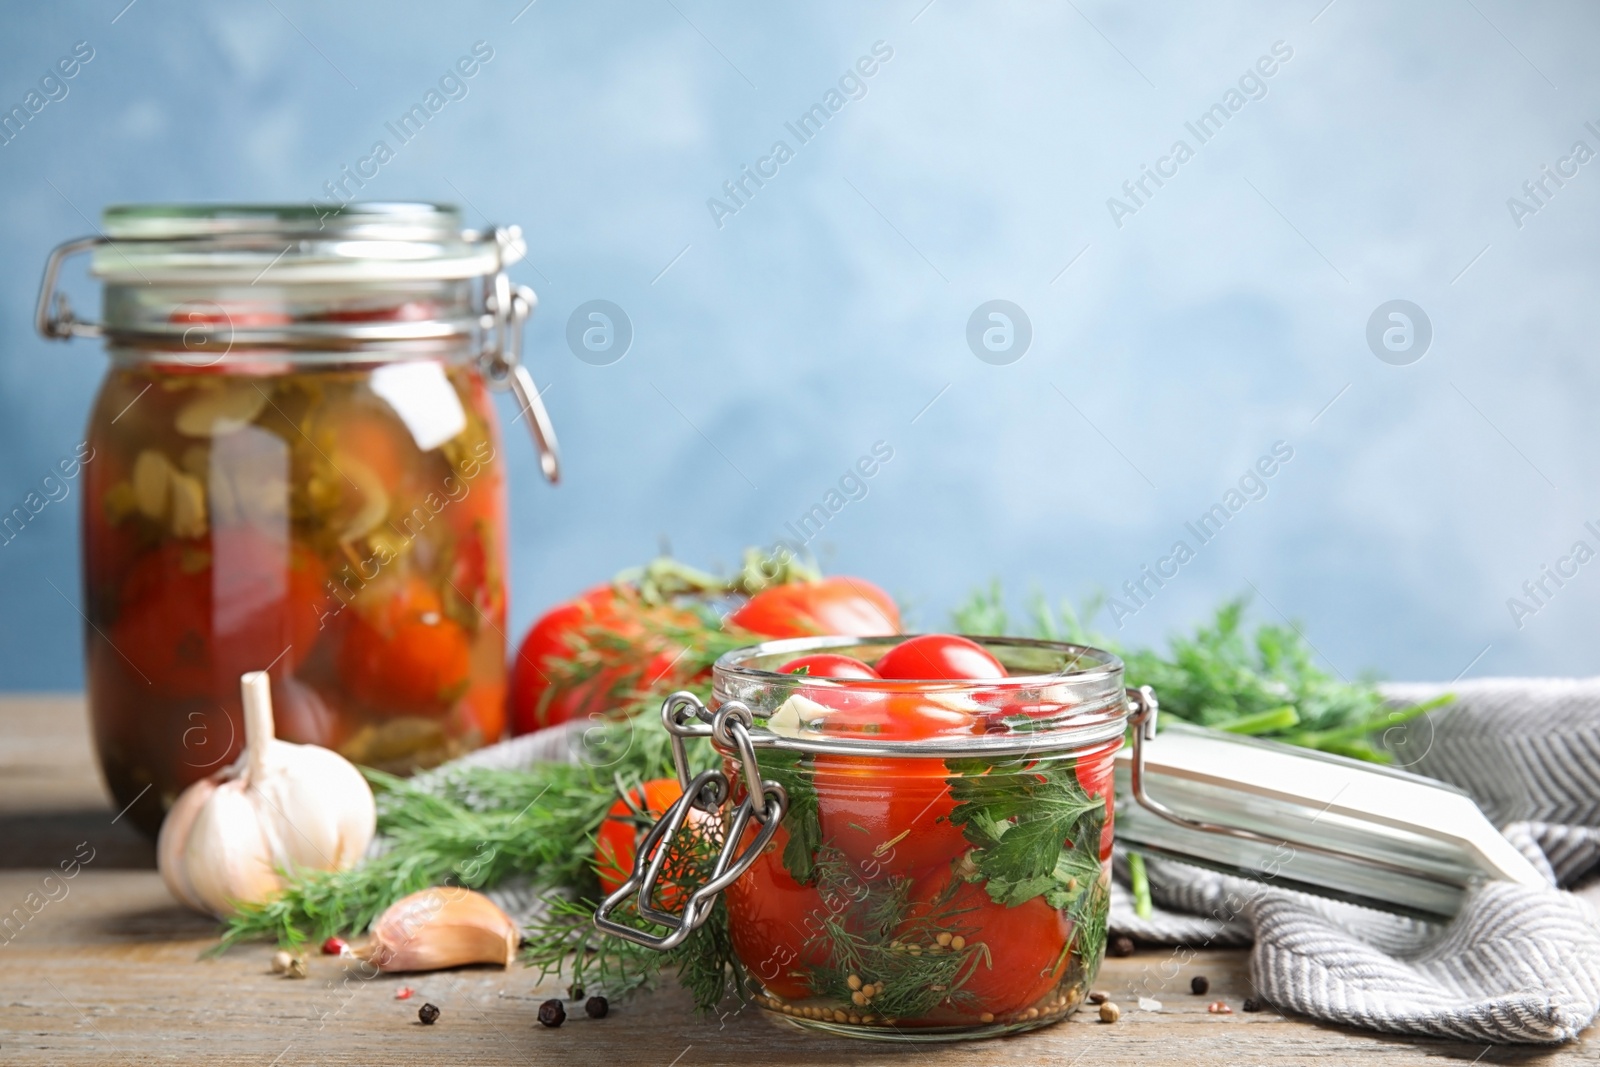 Photo of Pickled tomatoes in glass jars and products on wooden table against blue background, space for text